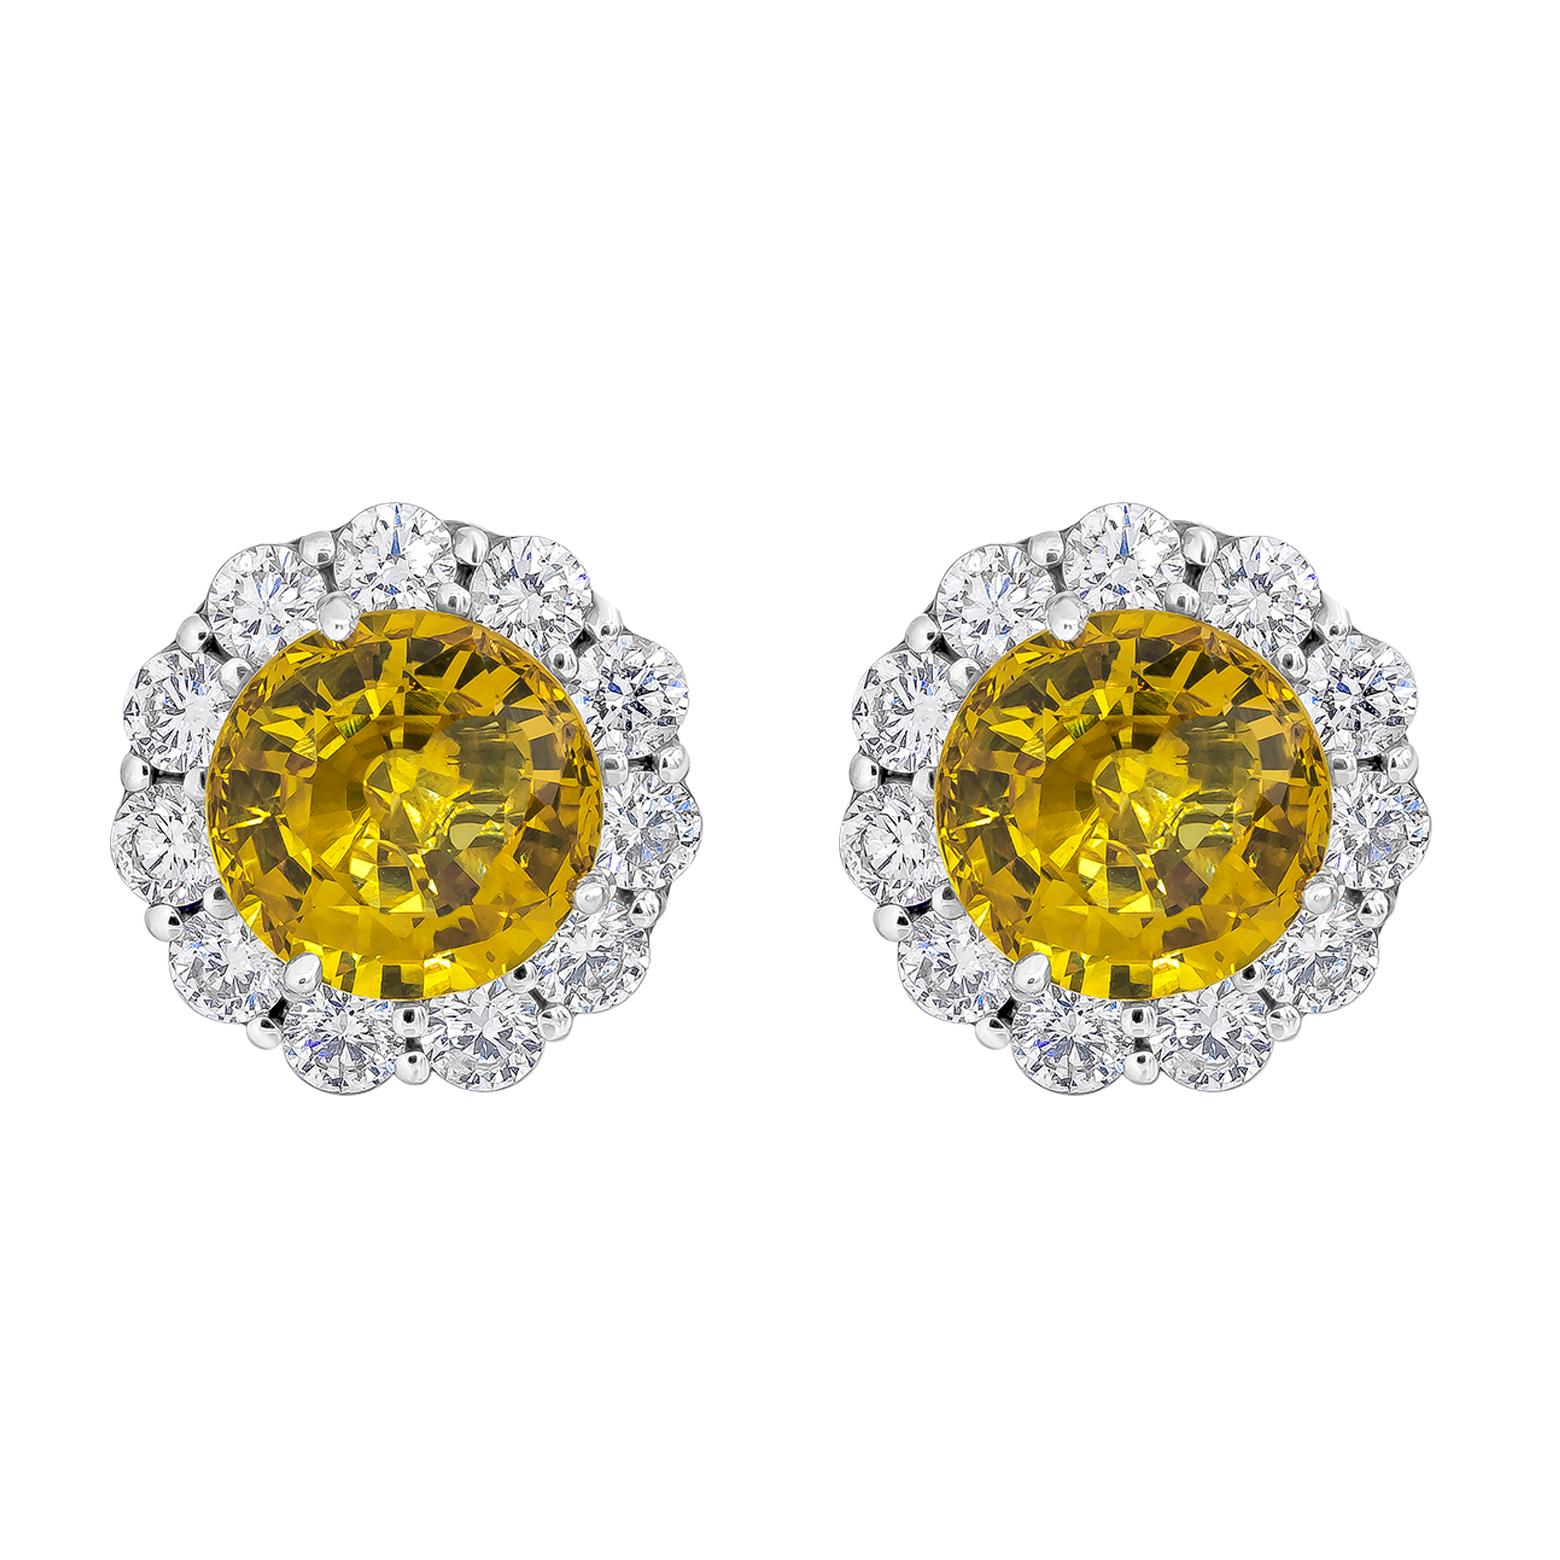 Showcasing two color-rich brilliant round cut yellow sapphires weighing 6.94 carats total, surrounded by a single row of round brilliant diamonds weigh 2.12 carats total. Beautifully set in a polished platinum mounting.

Style available in different